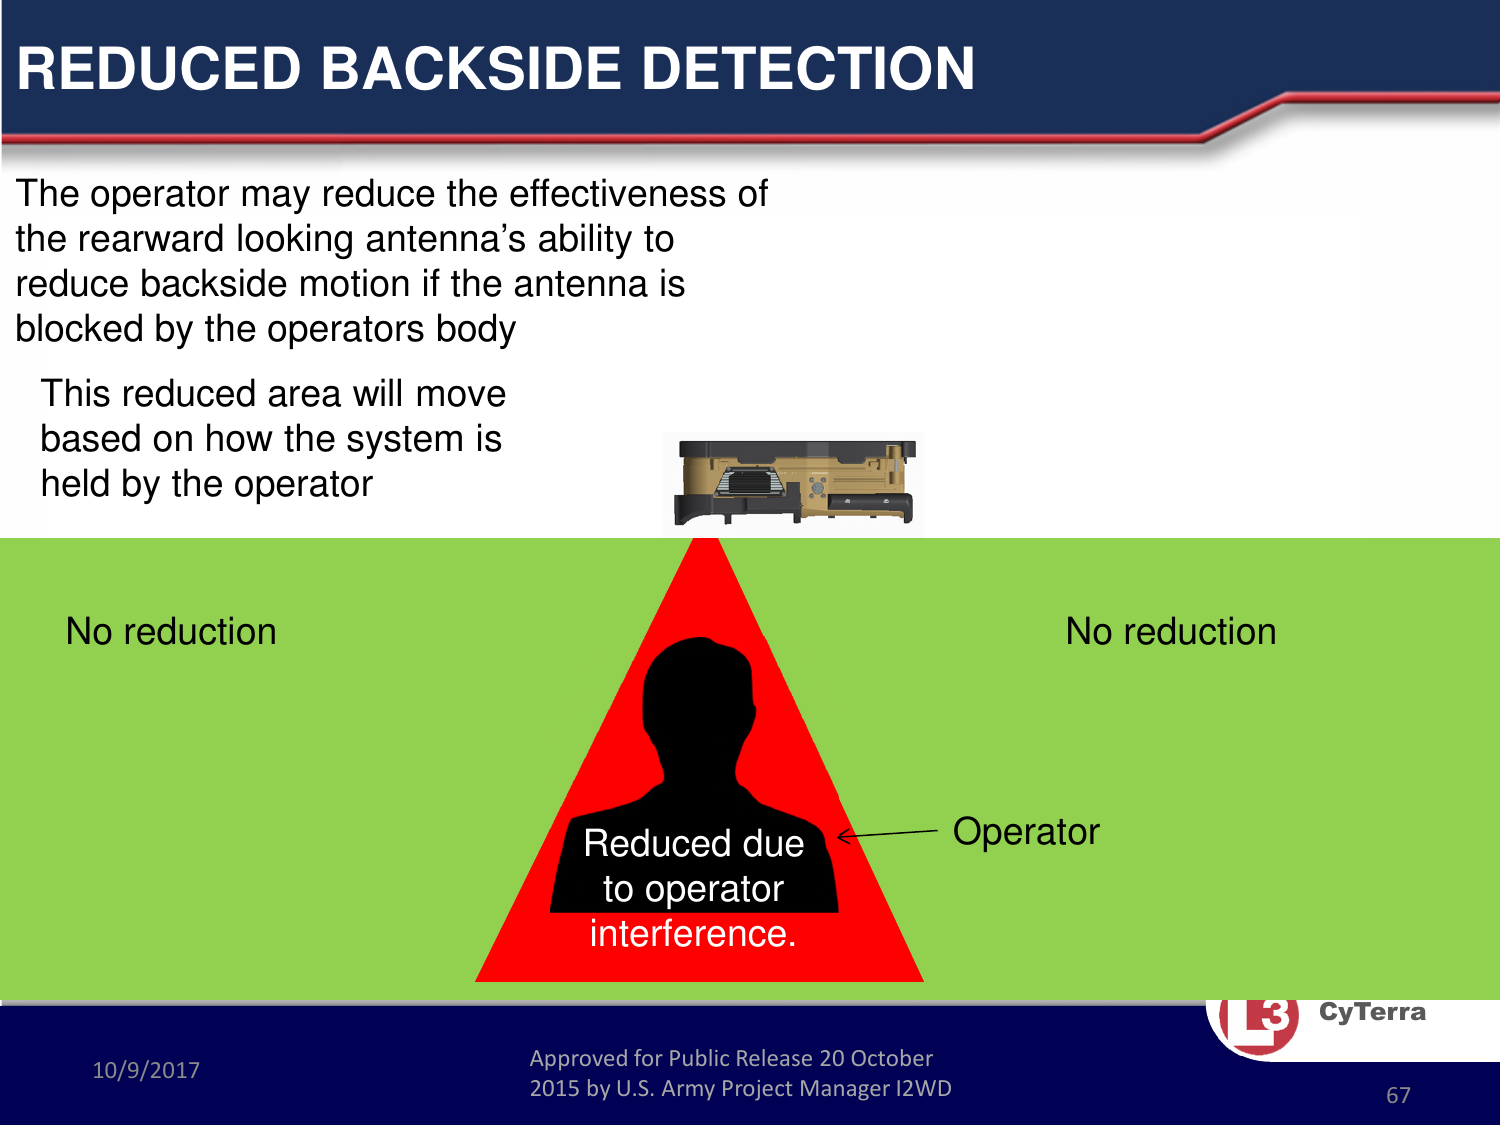 Approved for Public Release 20 October 2015 by U.S. Army Project Manager I2WD10/9/2017 Approved for Public Release 20 October 2015 by U.S. Army Project Manager I2WD 67CyTerraREDUCED BACKSIDE DETECTIONThe operator may reduce the effectiveness of the rearward looking antenna’s ability to reduce backside motion if the antenna is blocked by the operators bodyNo reduction No reductionThis reduced area will move based on how the system is held by the operatorOperatorReduced due to operator interference.